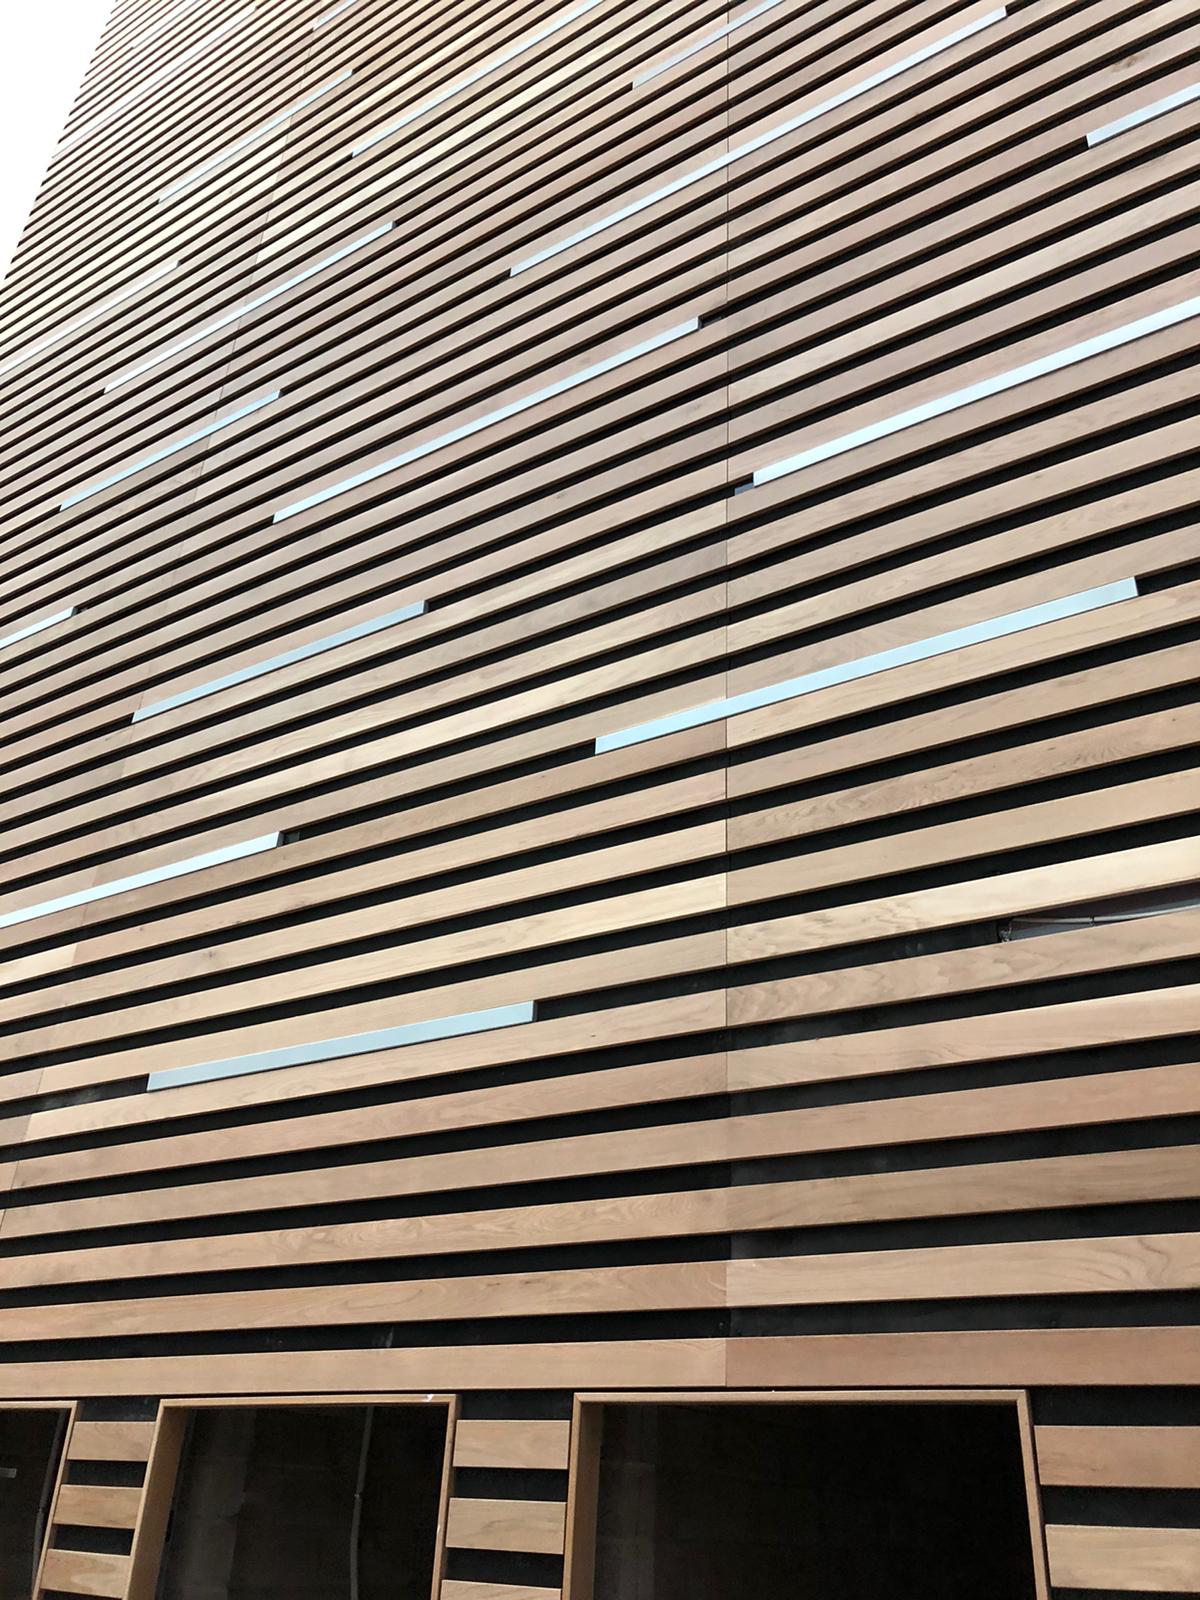 External BCL timber cladding system at Warrington Square